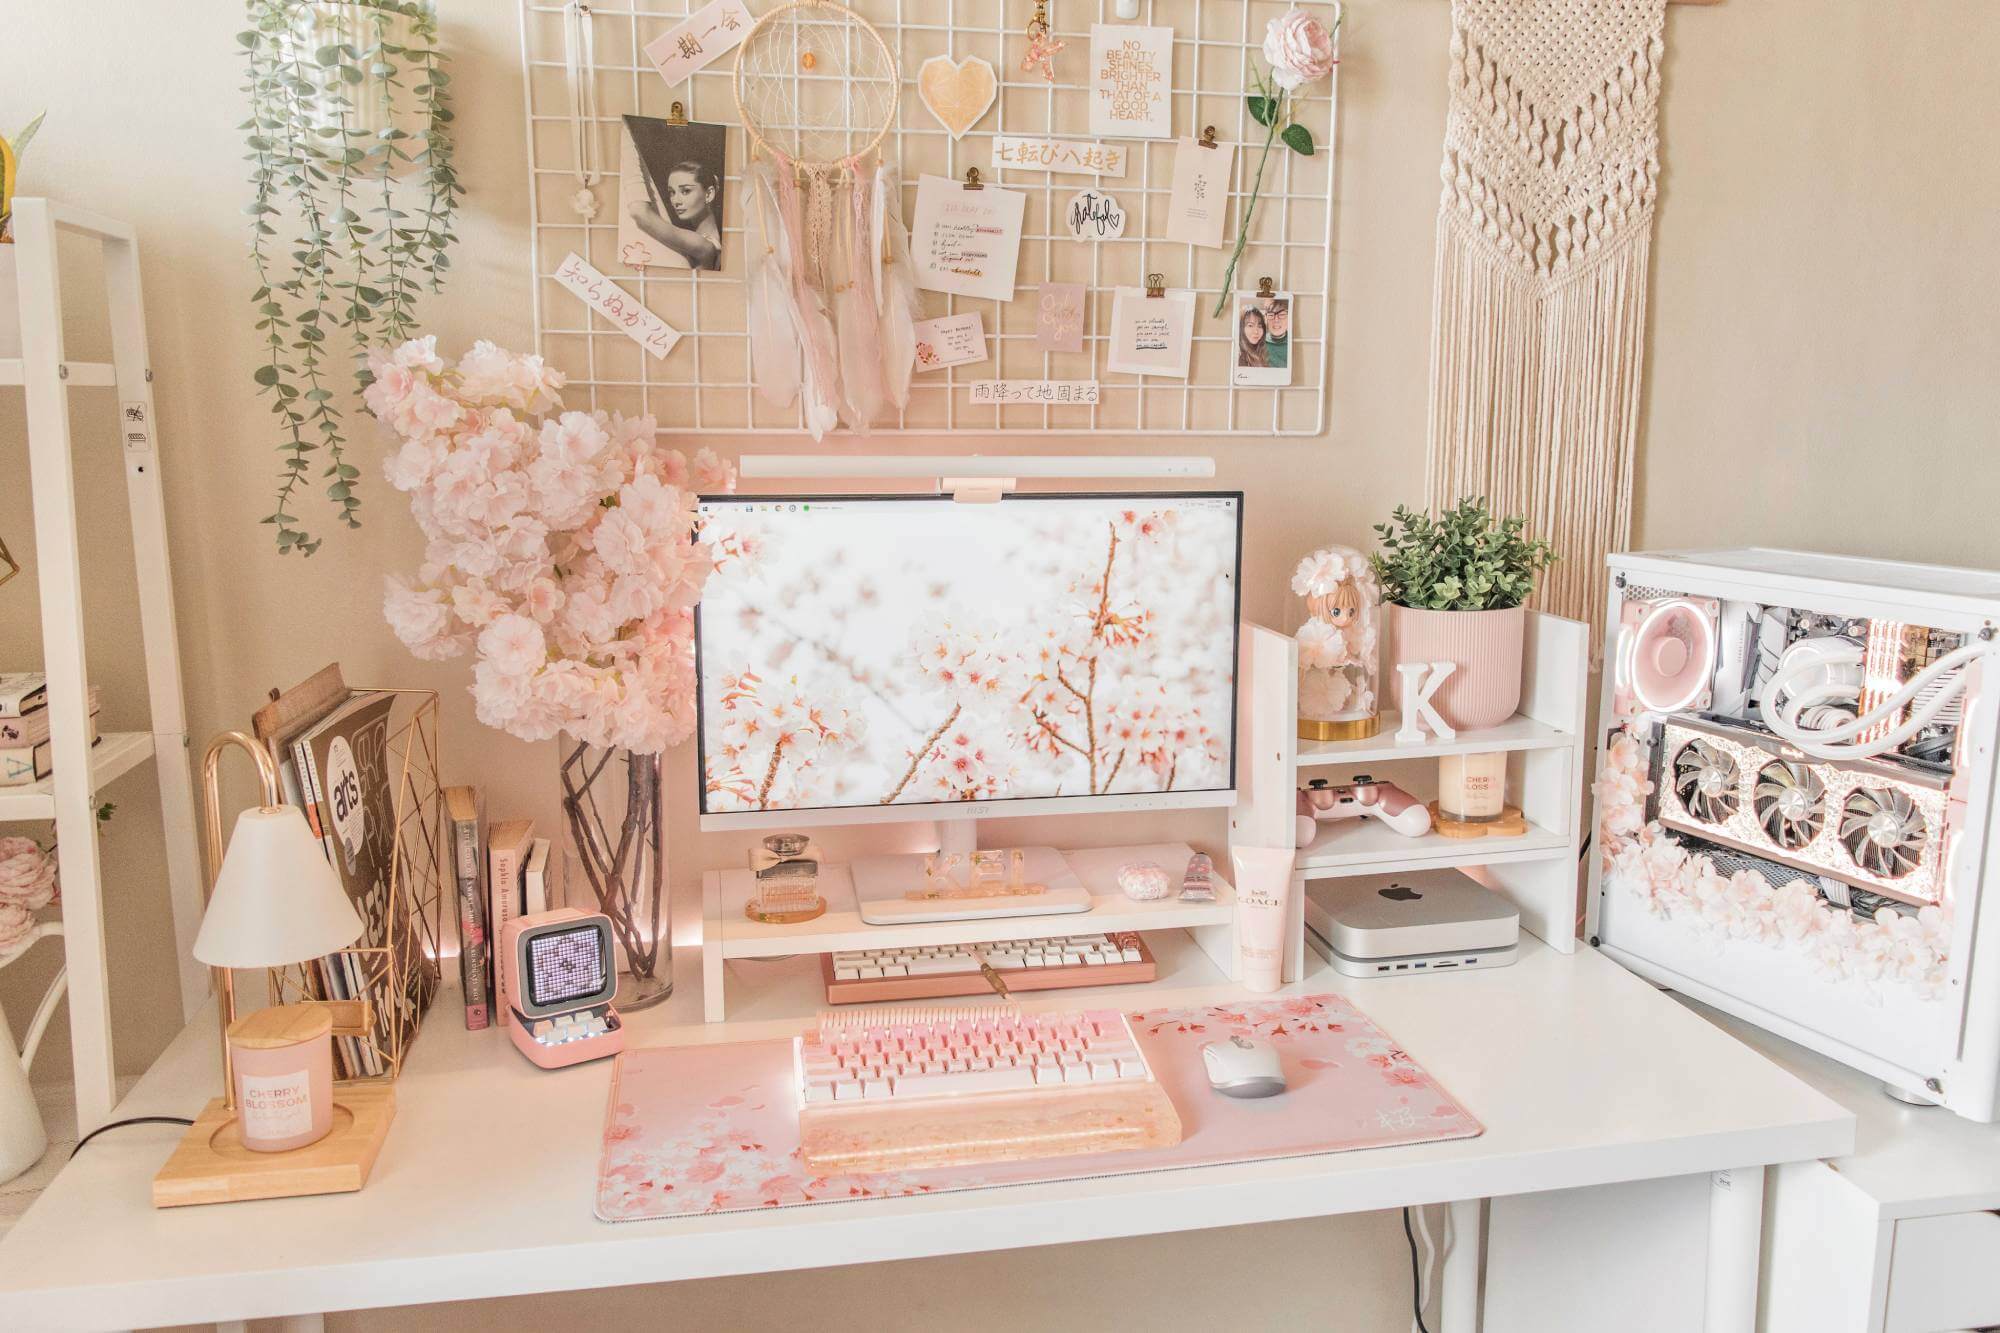 girly cubicle decorating ideas